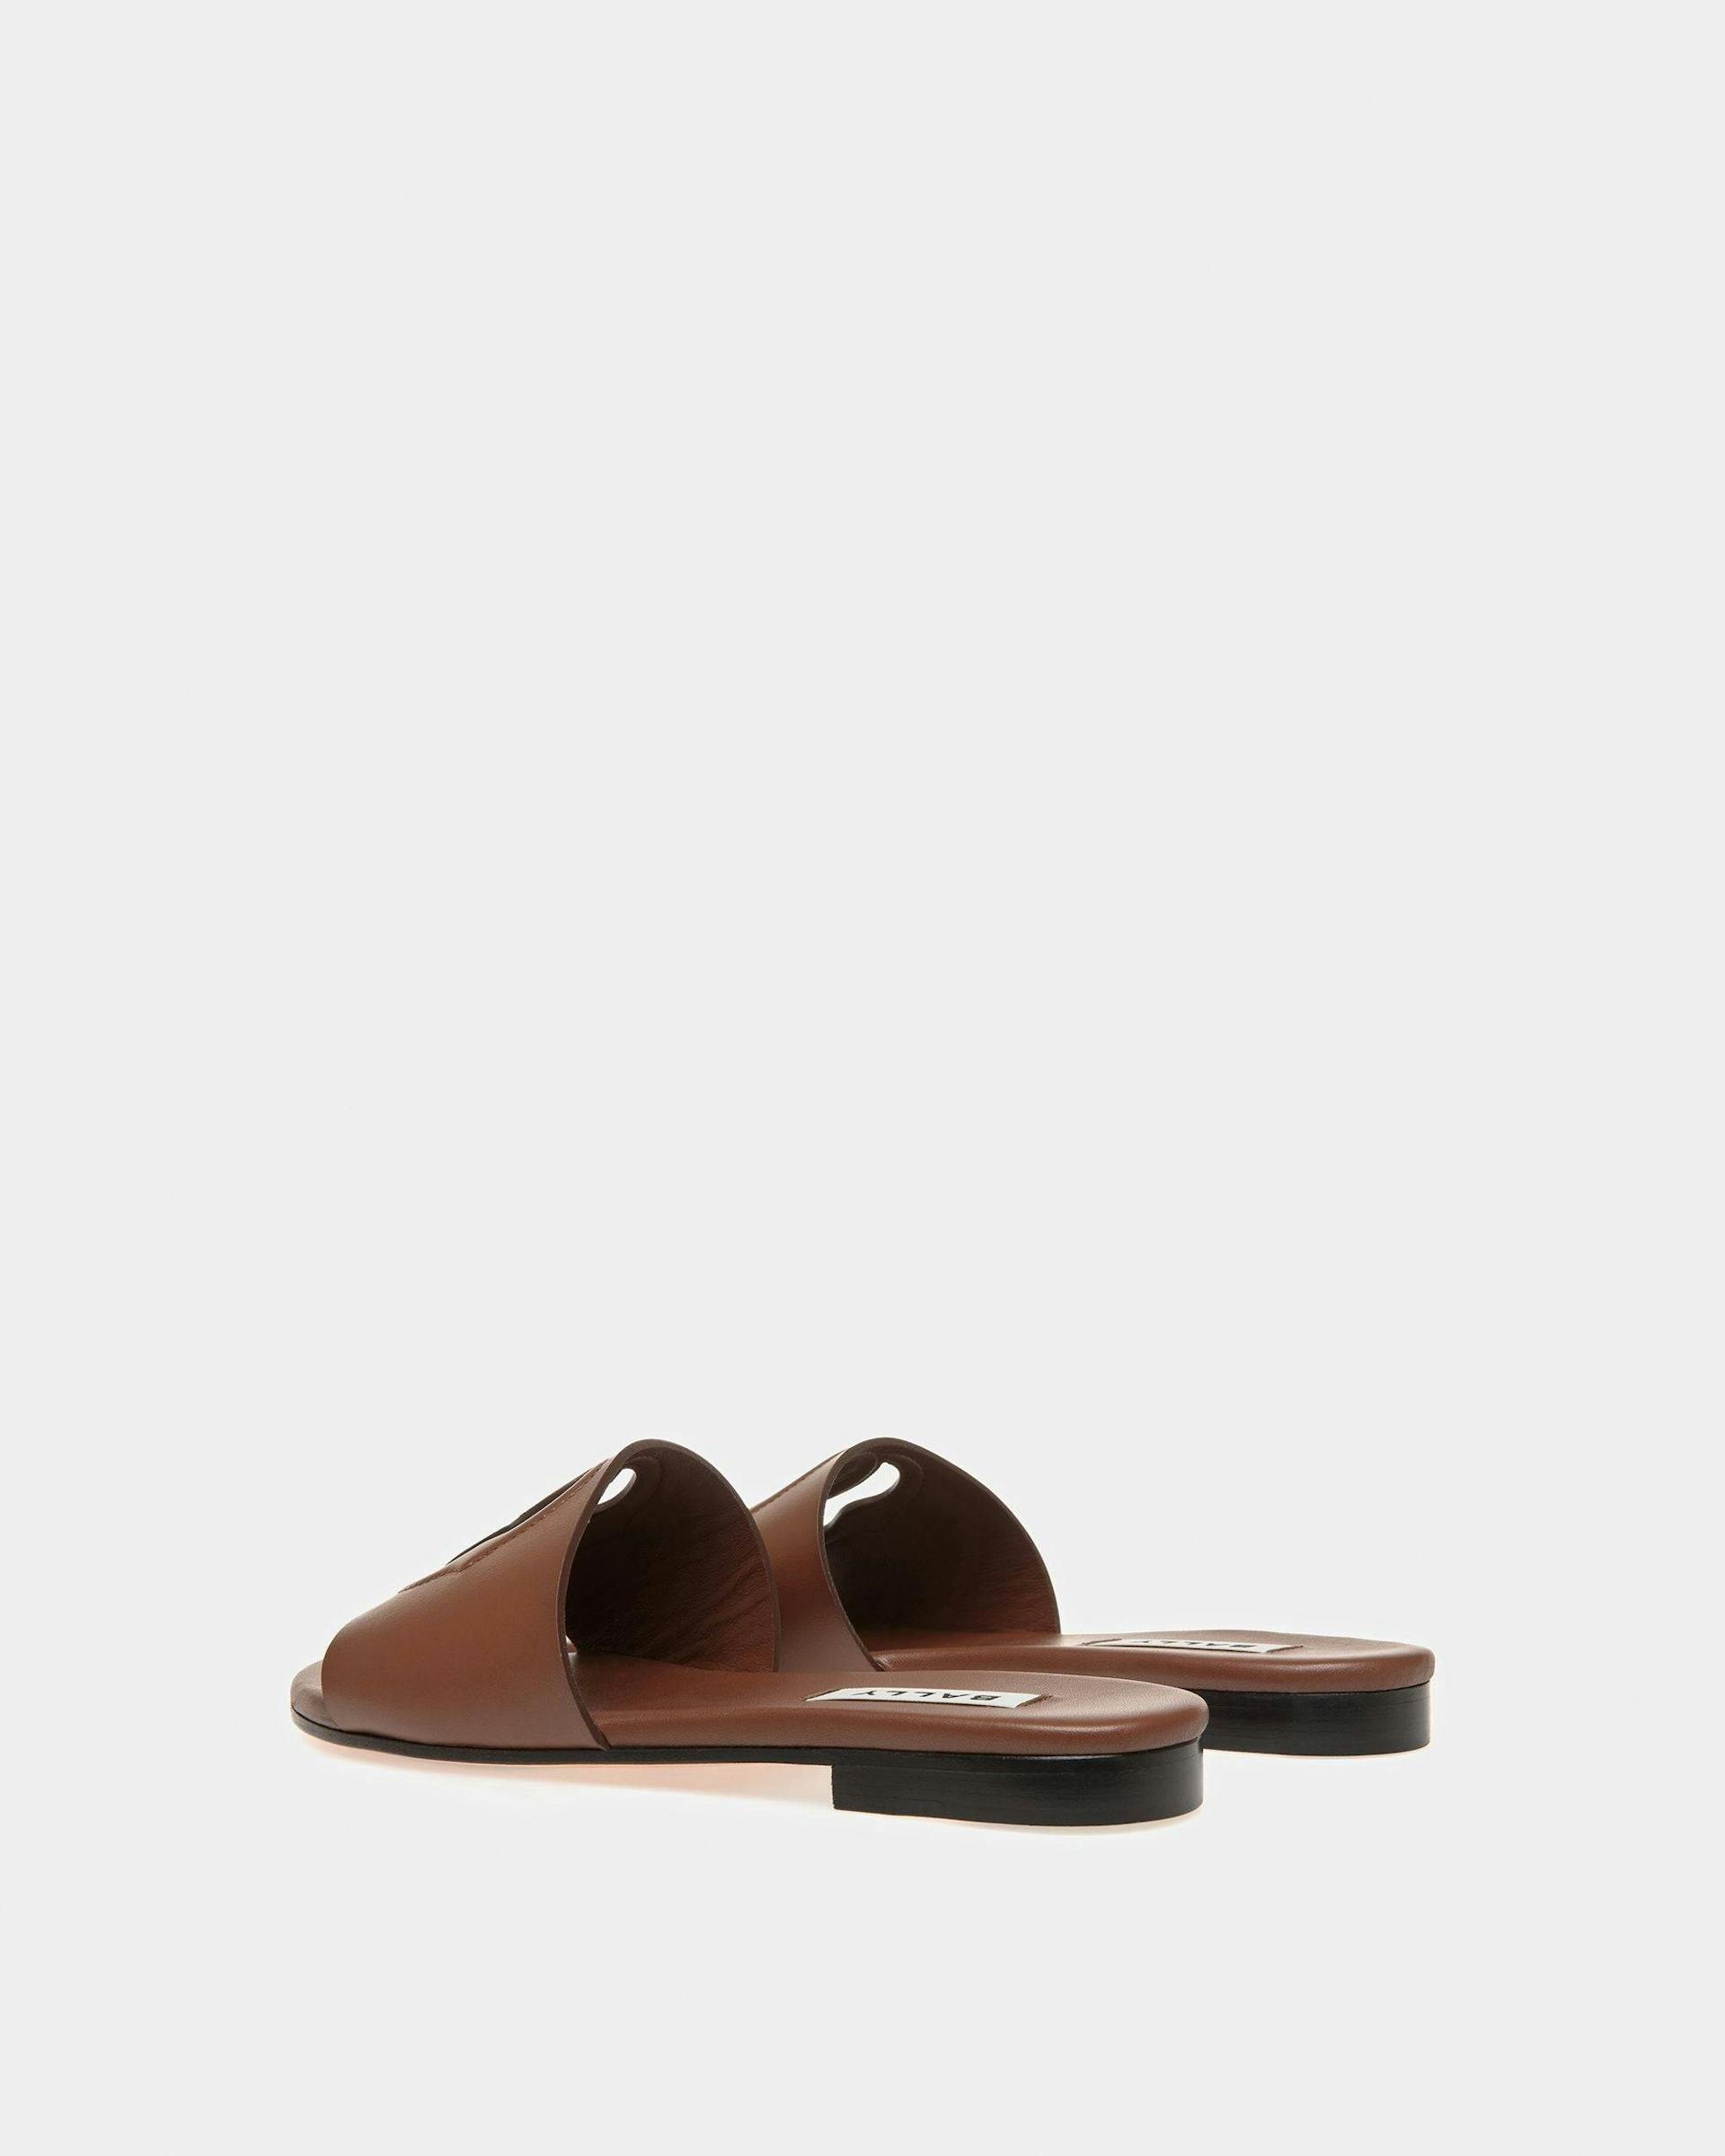 Emblem Slides In Brown Leather - Women's - Bally - 03